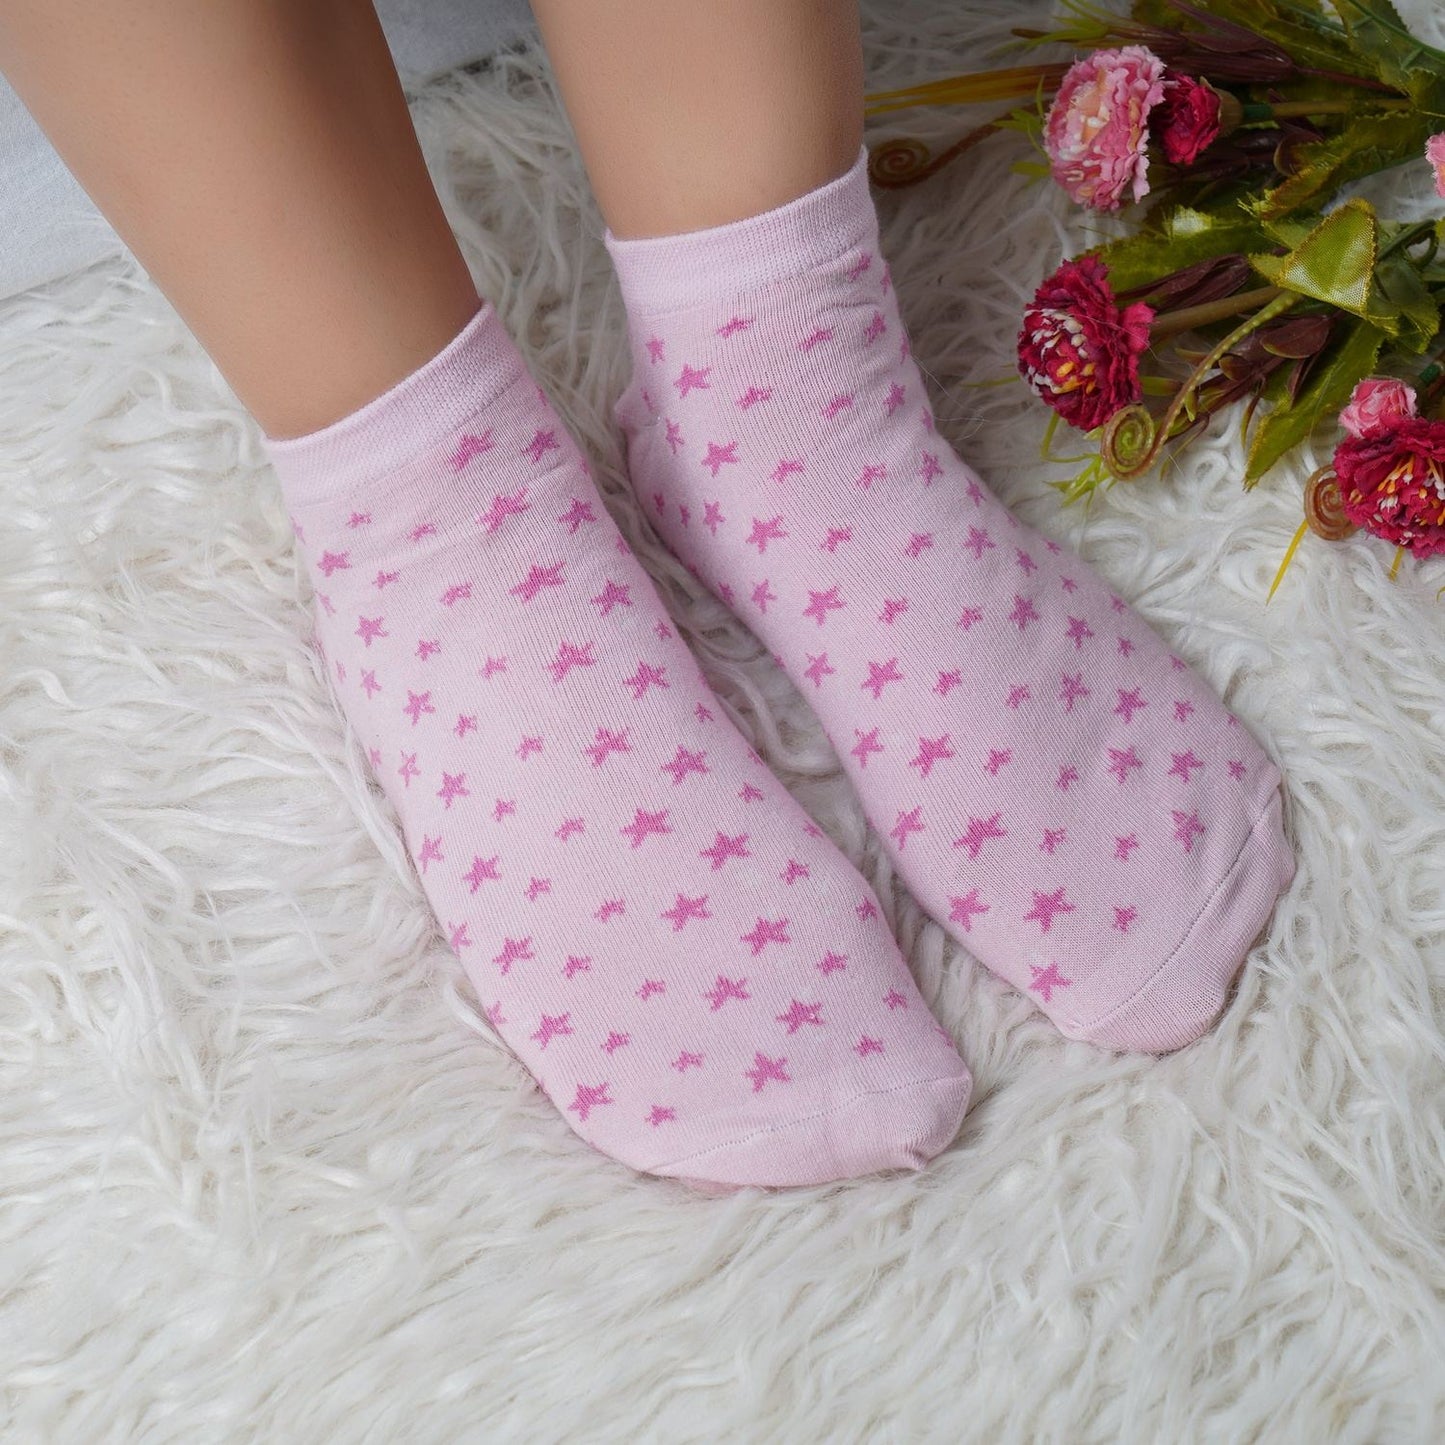 Low Ankle Star Pattern Cotton Socks (Baby Pink)